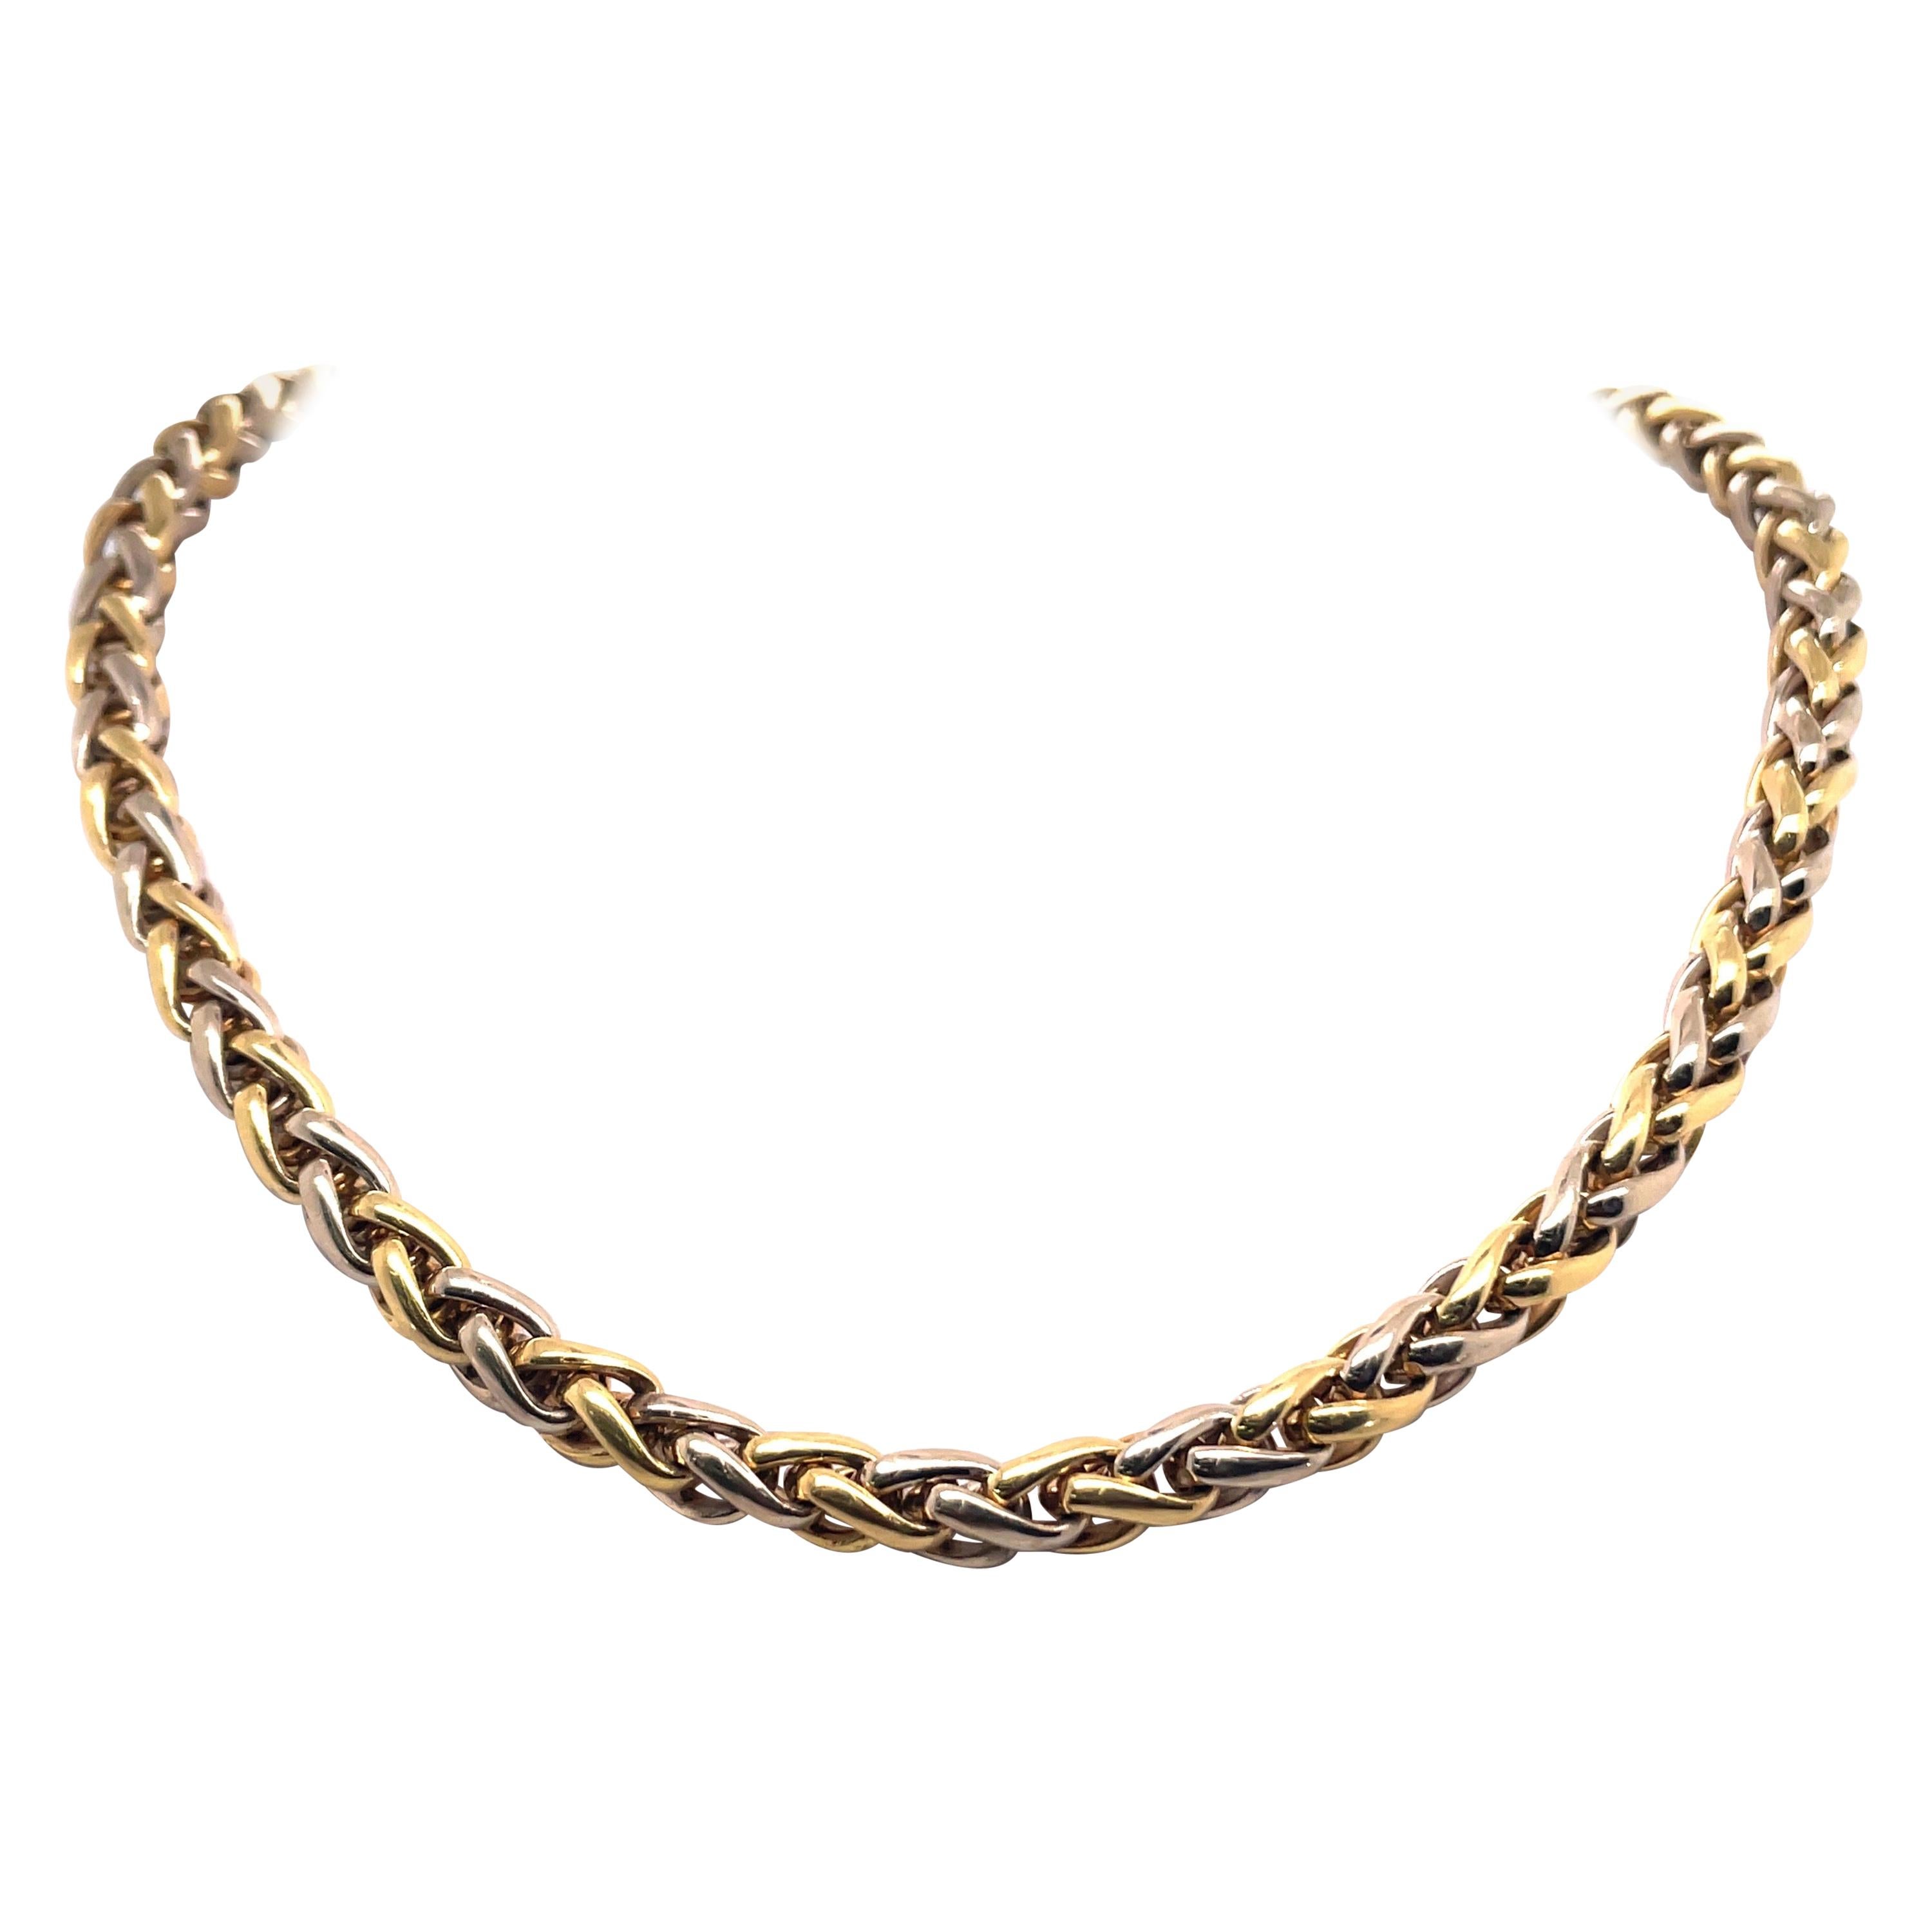 Two-Tone Braided Necklace 14 Karat Gold 37.5 Grams 